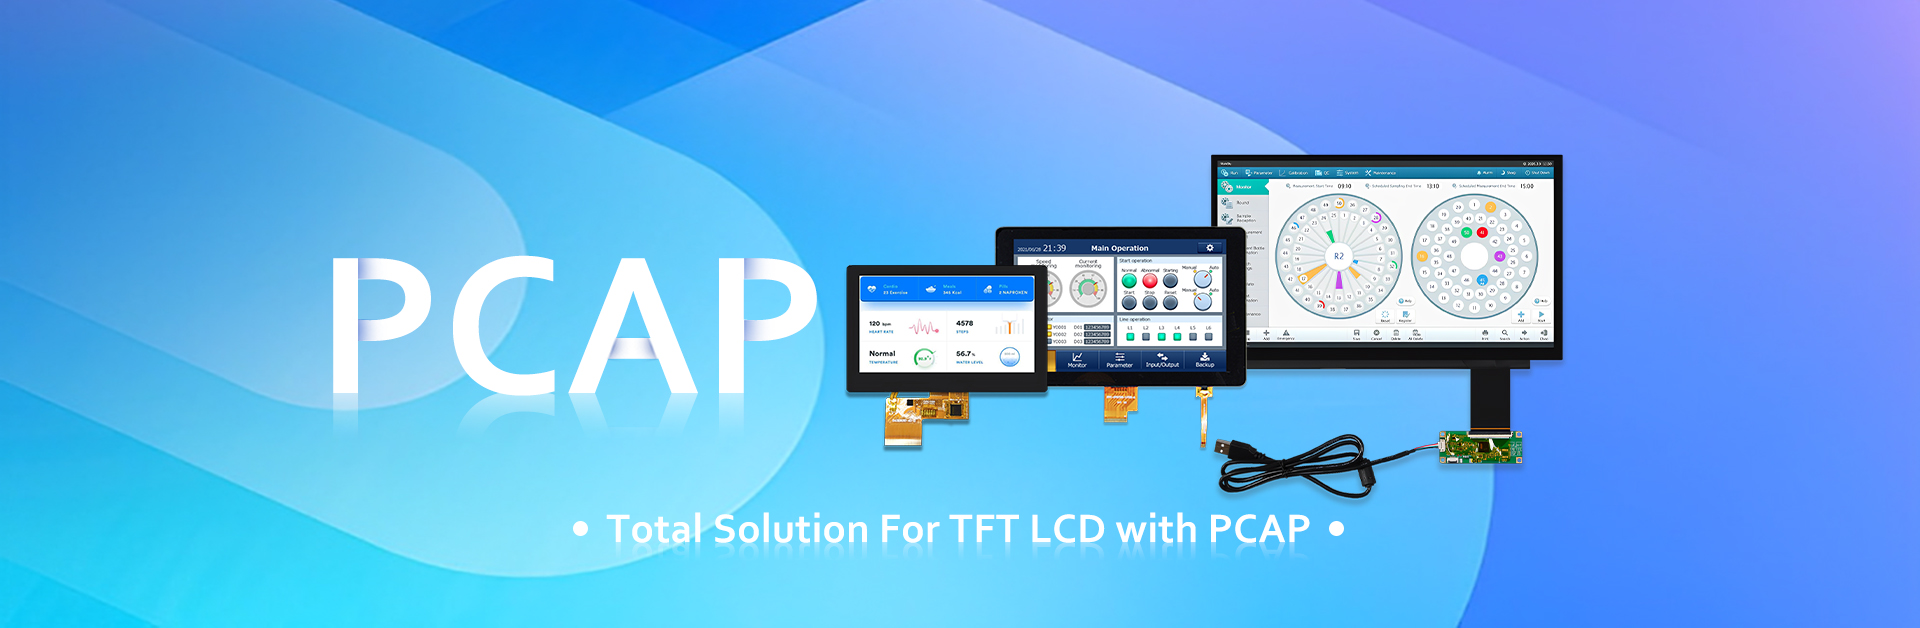 Total solution for TFT LCD with PCAP